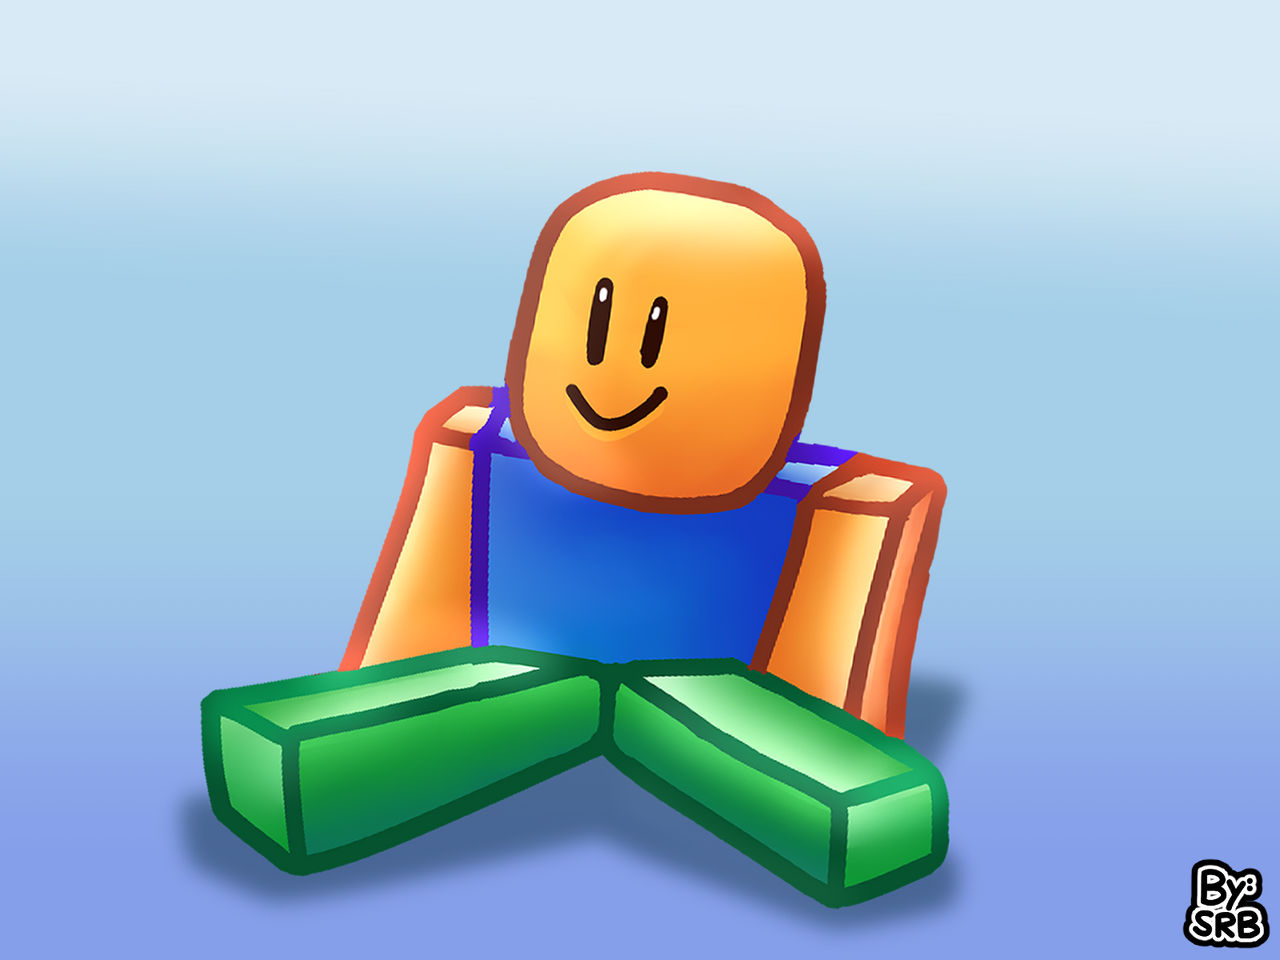 Just A Roblox Noob Sitting Down by SuperRobloxBros on DeviantArt